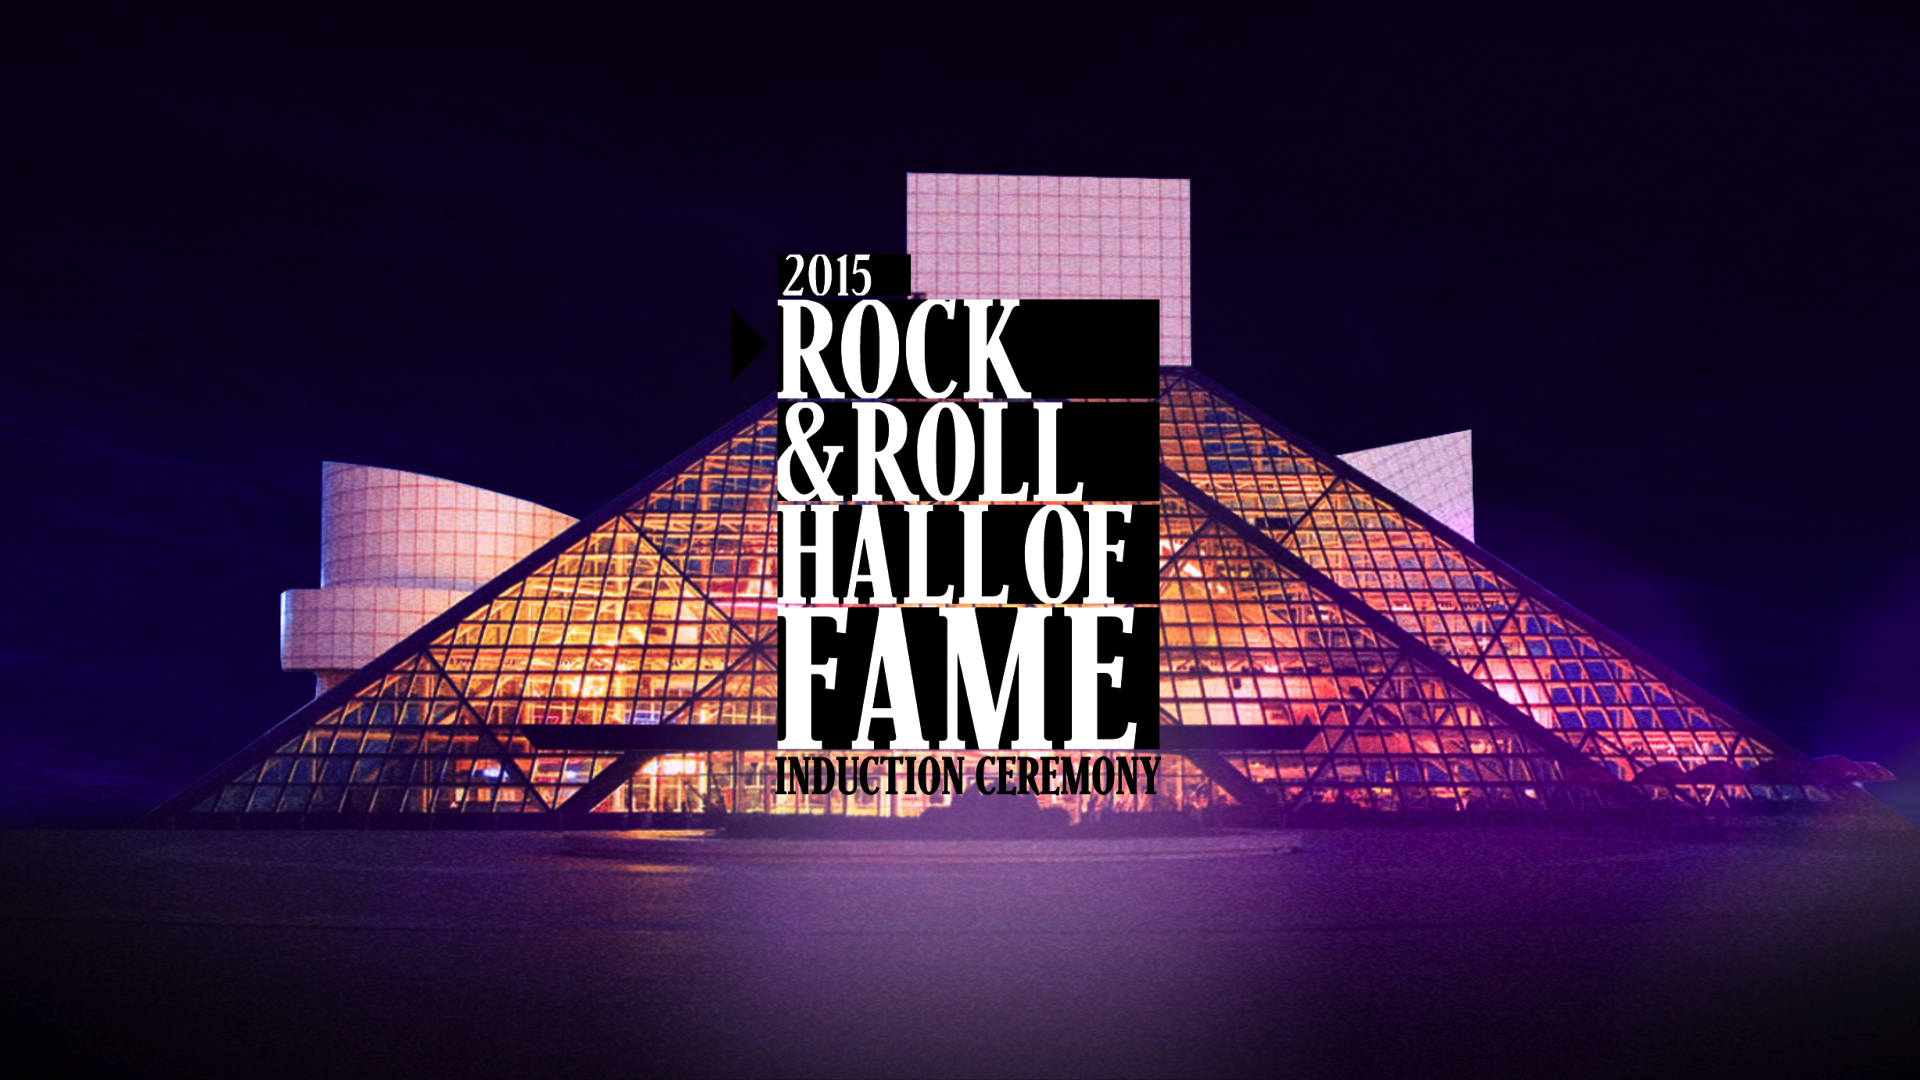 09_Rock And Roll Hall Of Fame Induction Ceremony.jpg